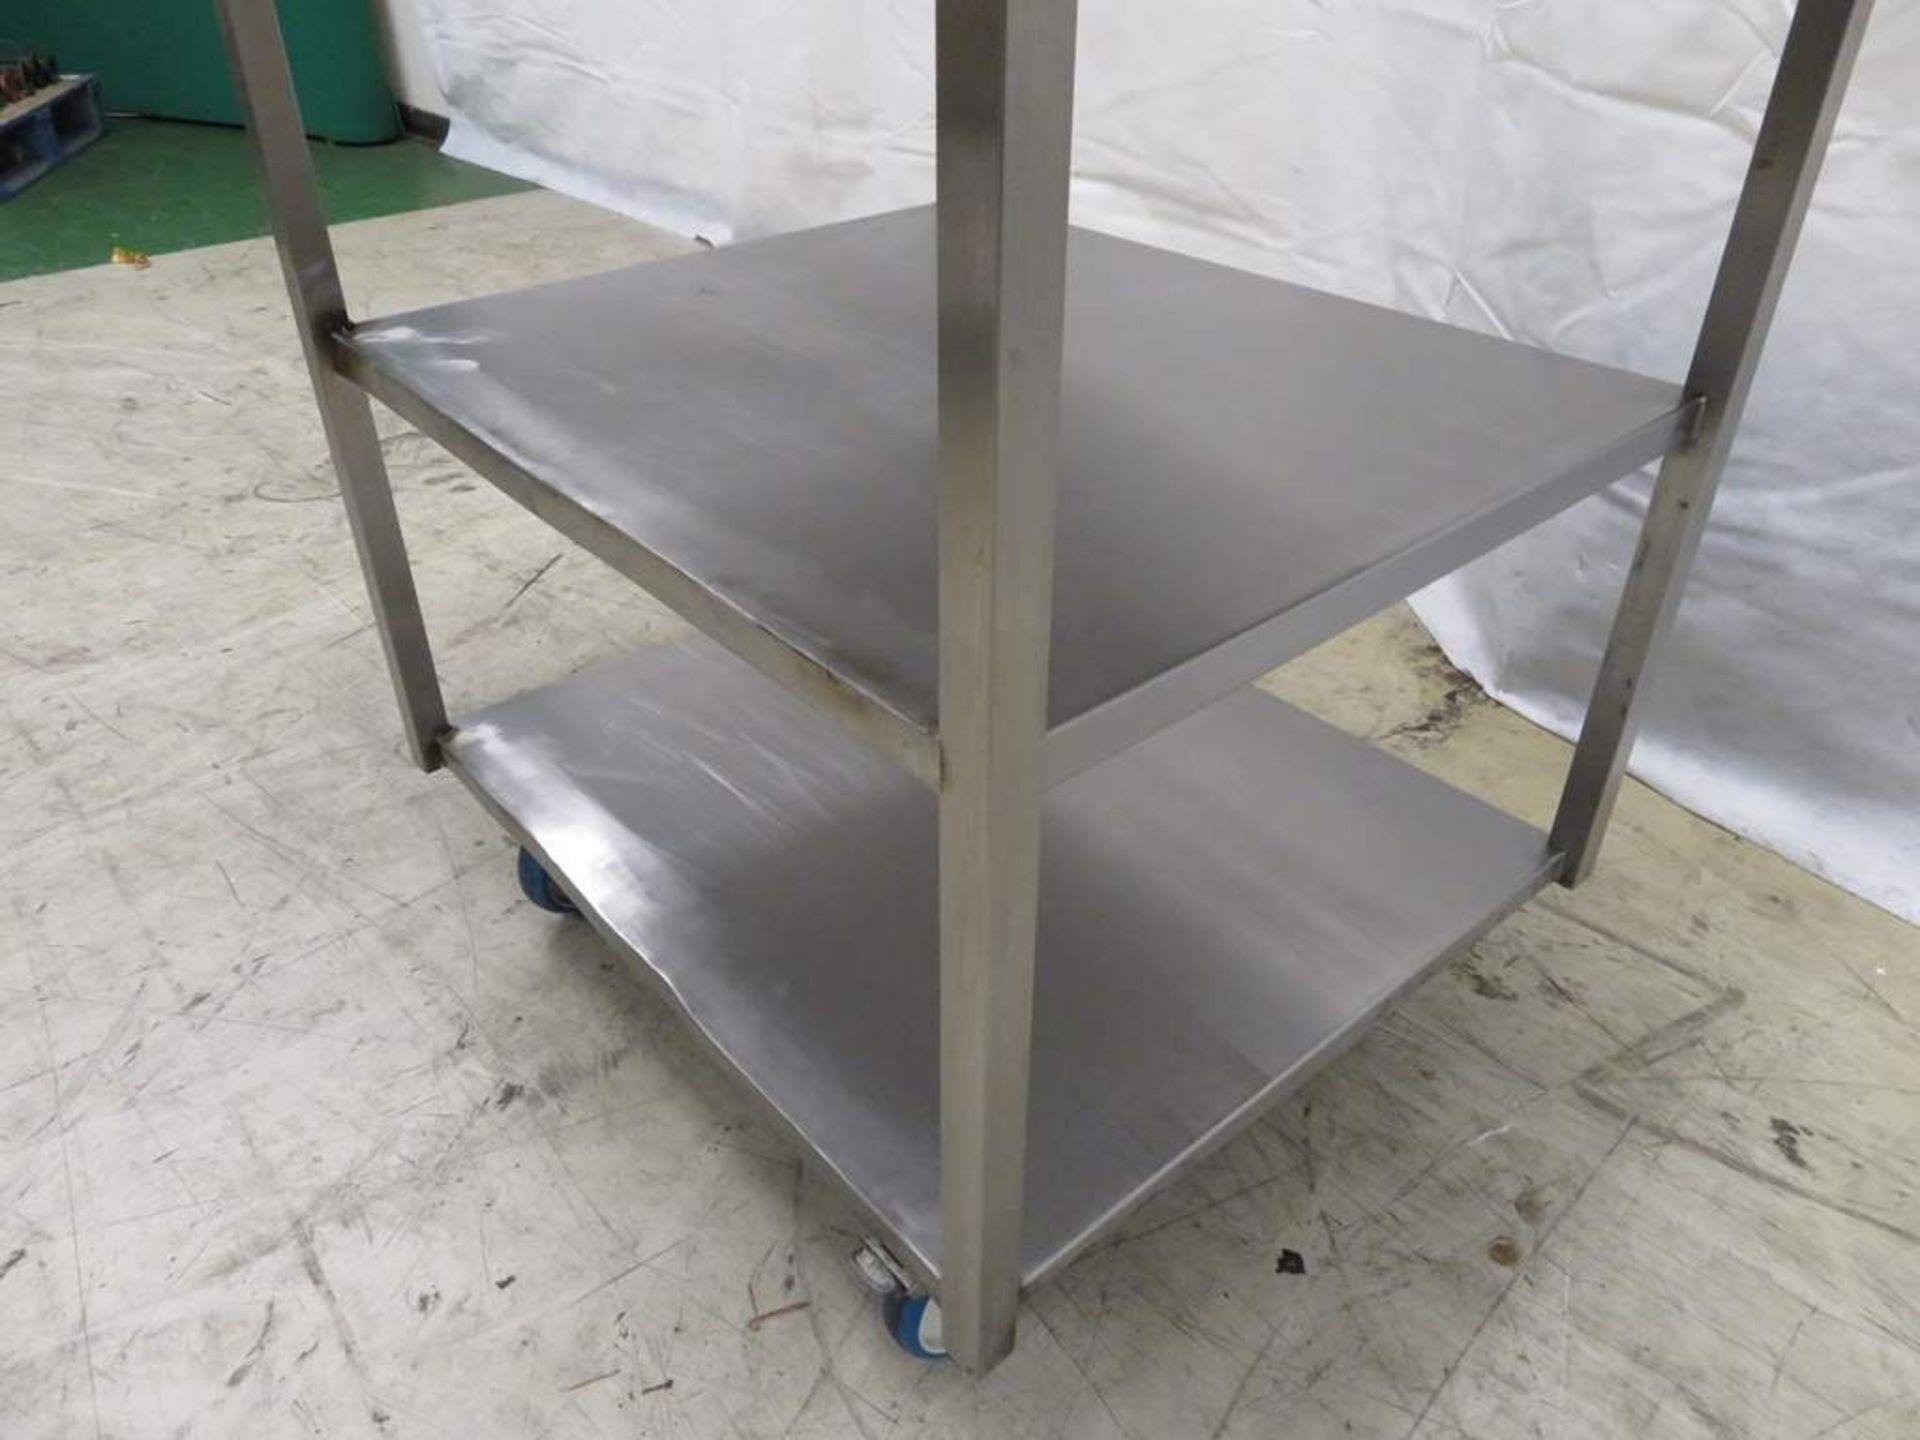 Stainless Steel Corner Preperation Table - Image 4 of 4